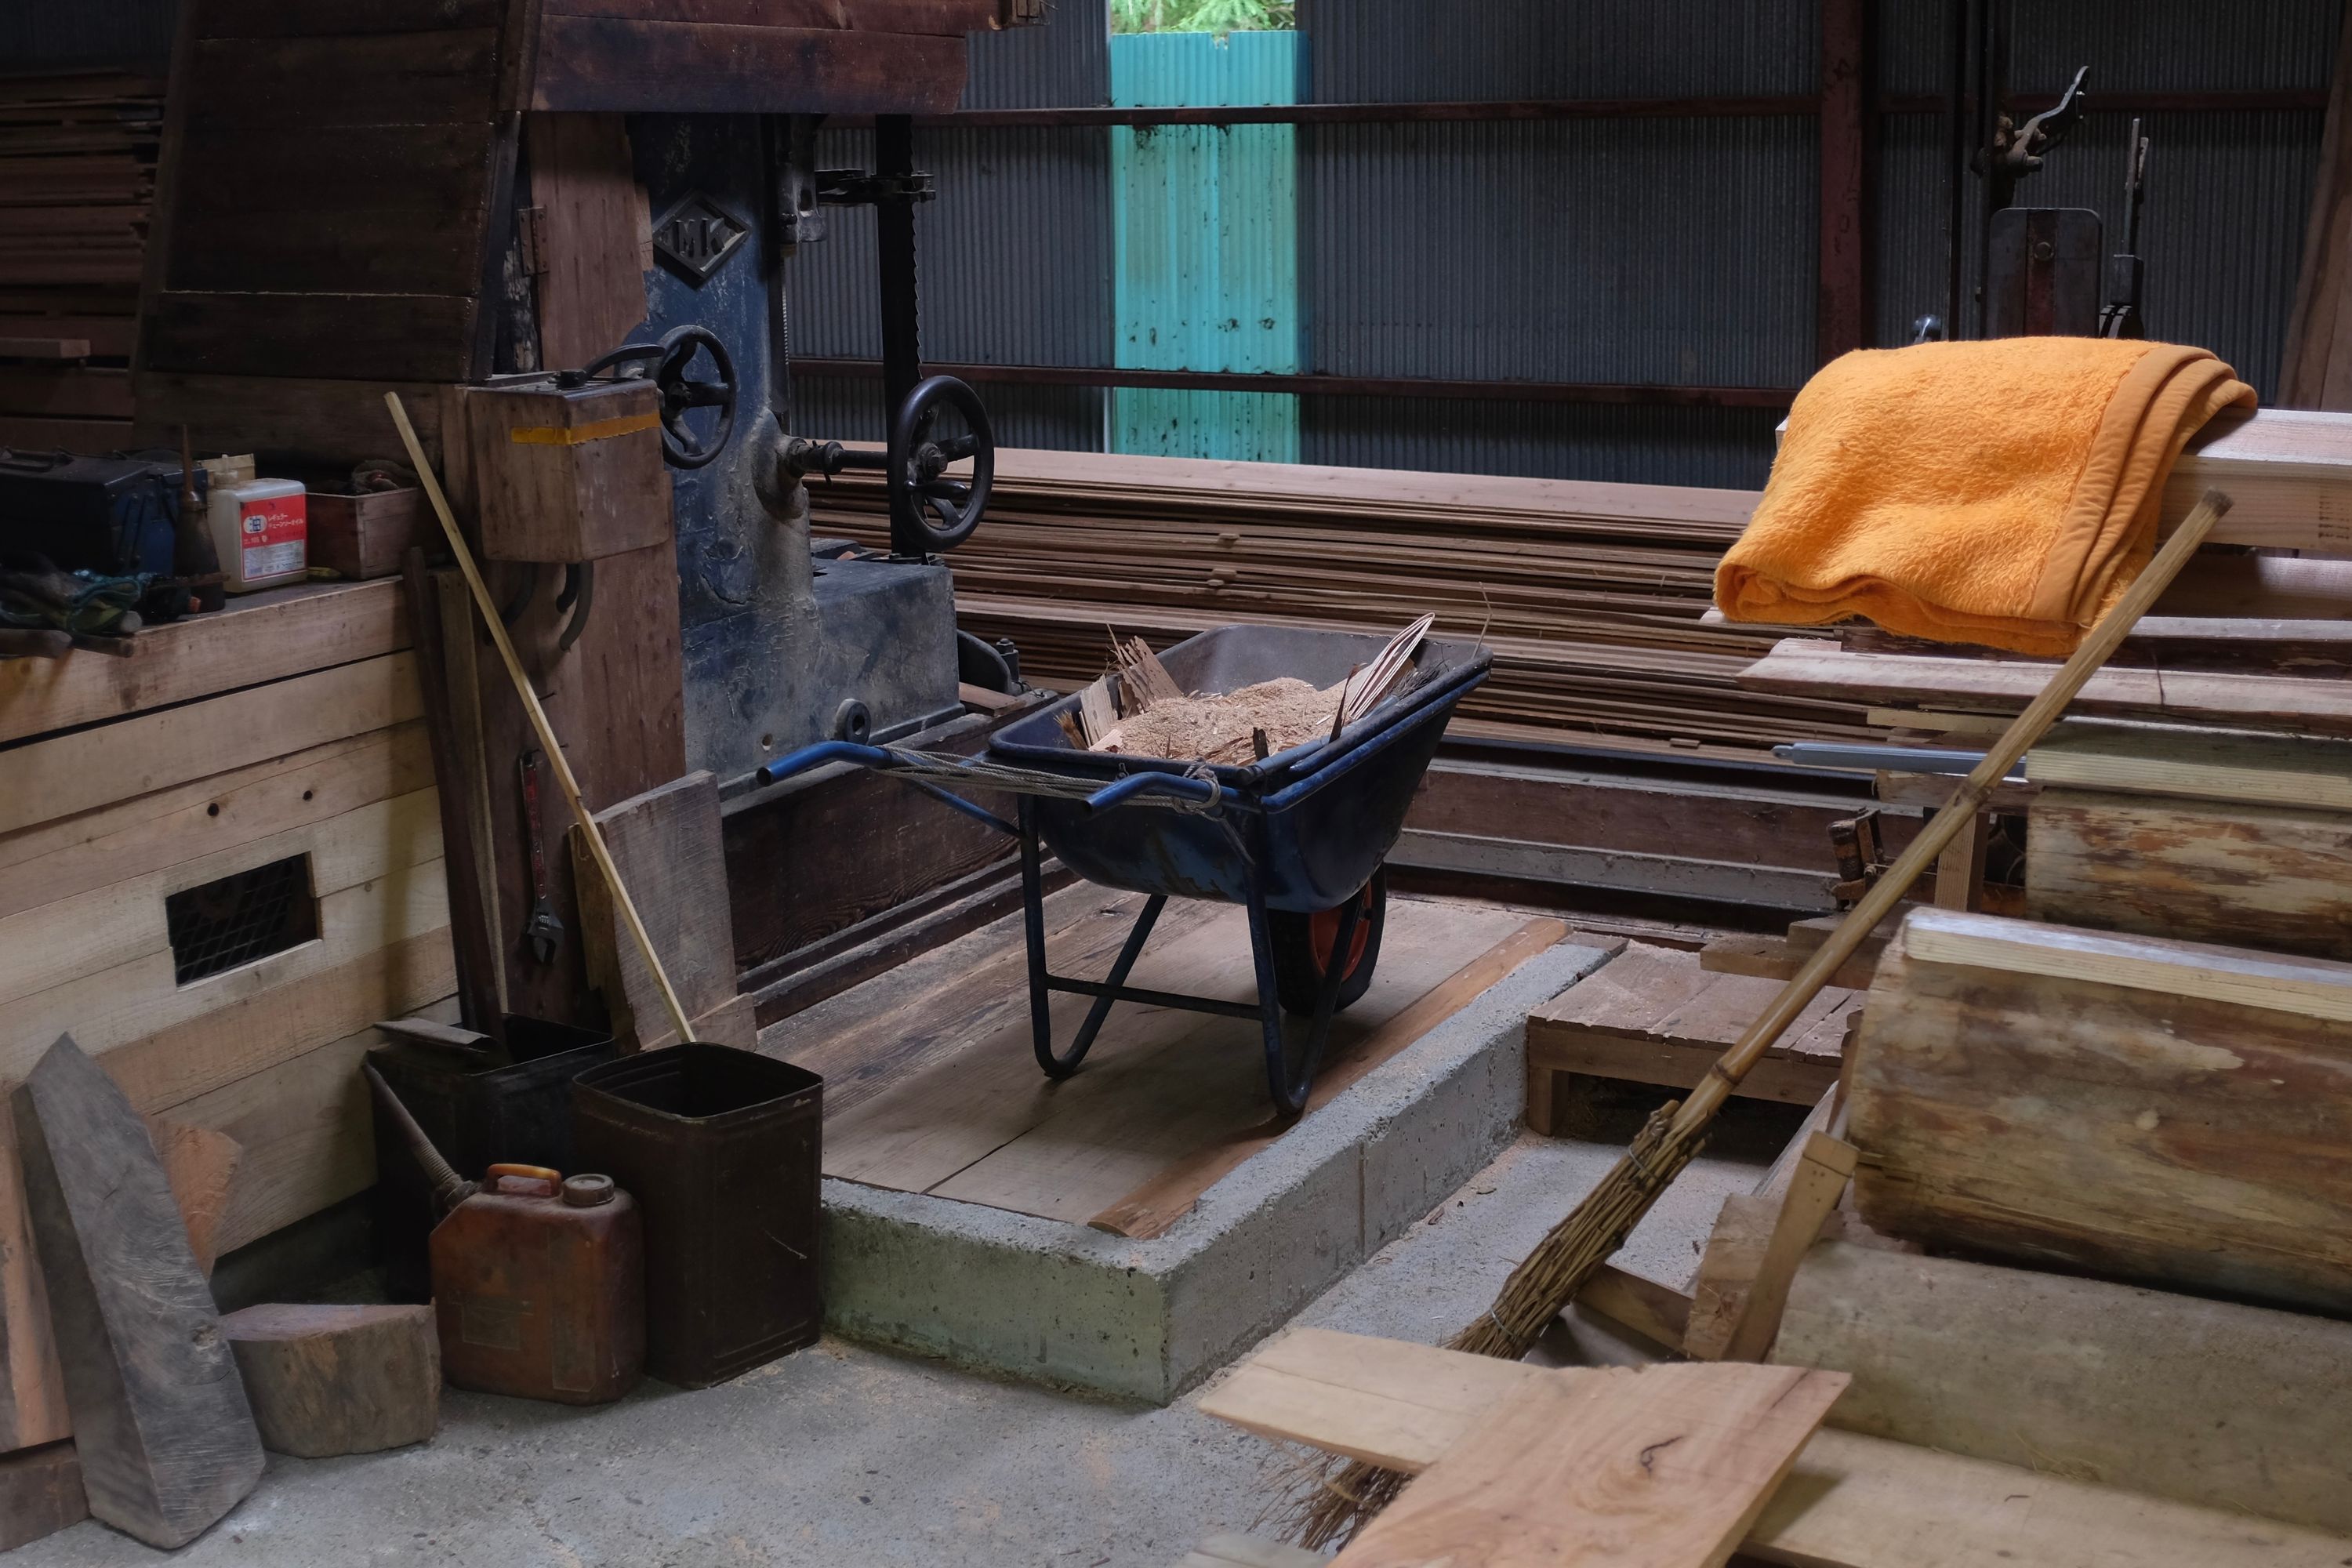 The inside of a sawmill: planks, timber, wood-cutting machines, various tools, a blue wheelbarrow filled with sawdust and scraps.